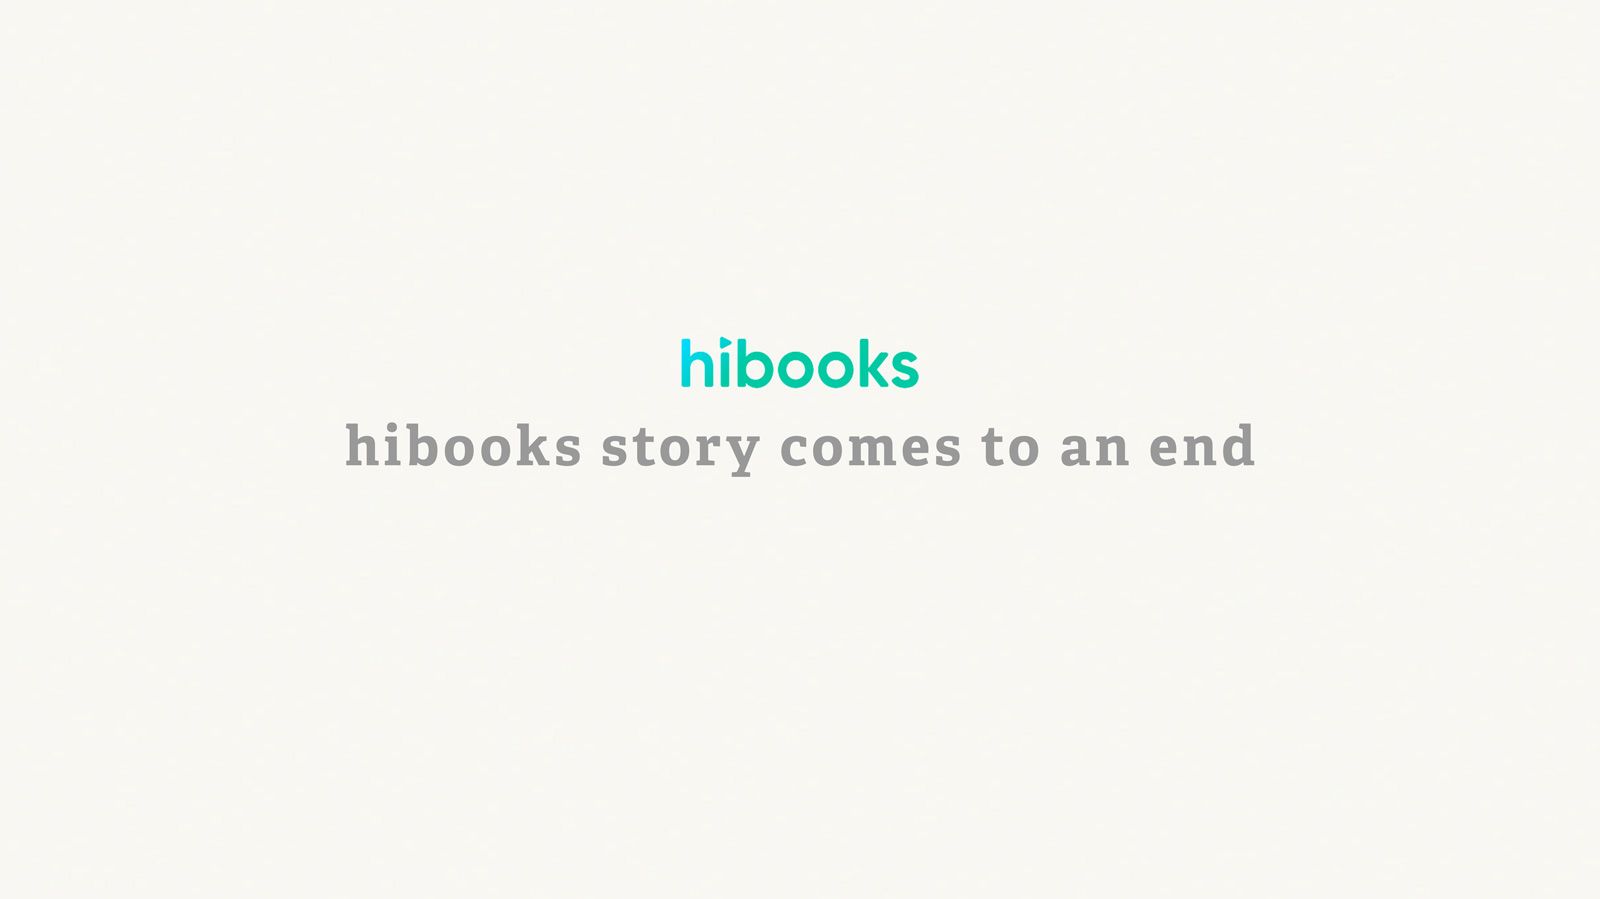 Hibooks Story Comes to an End